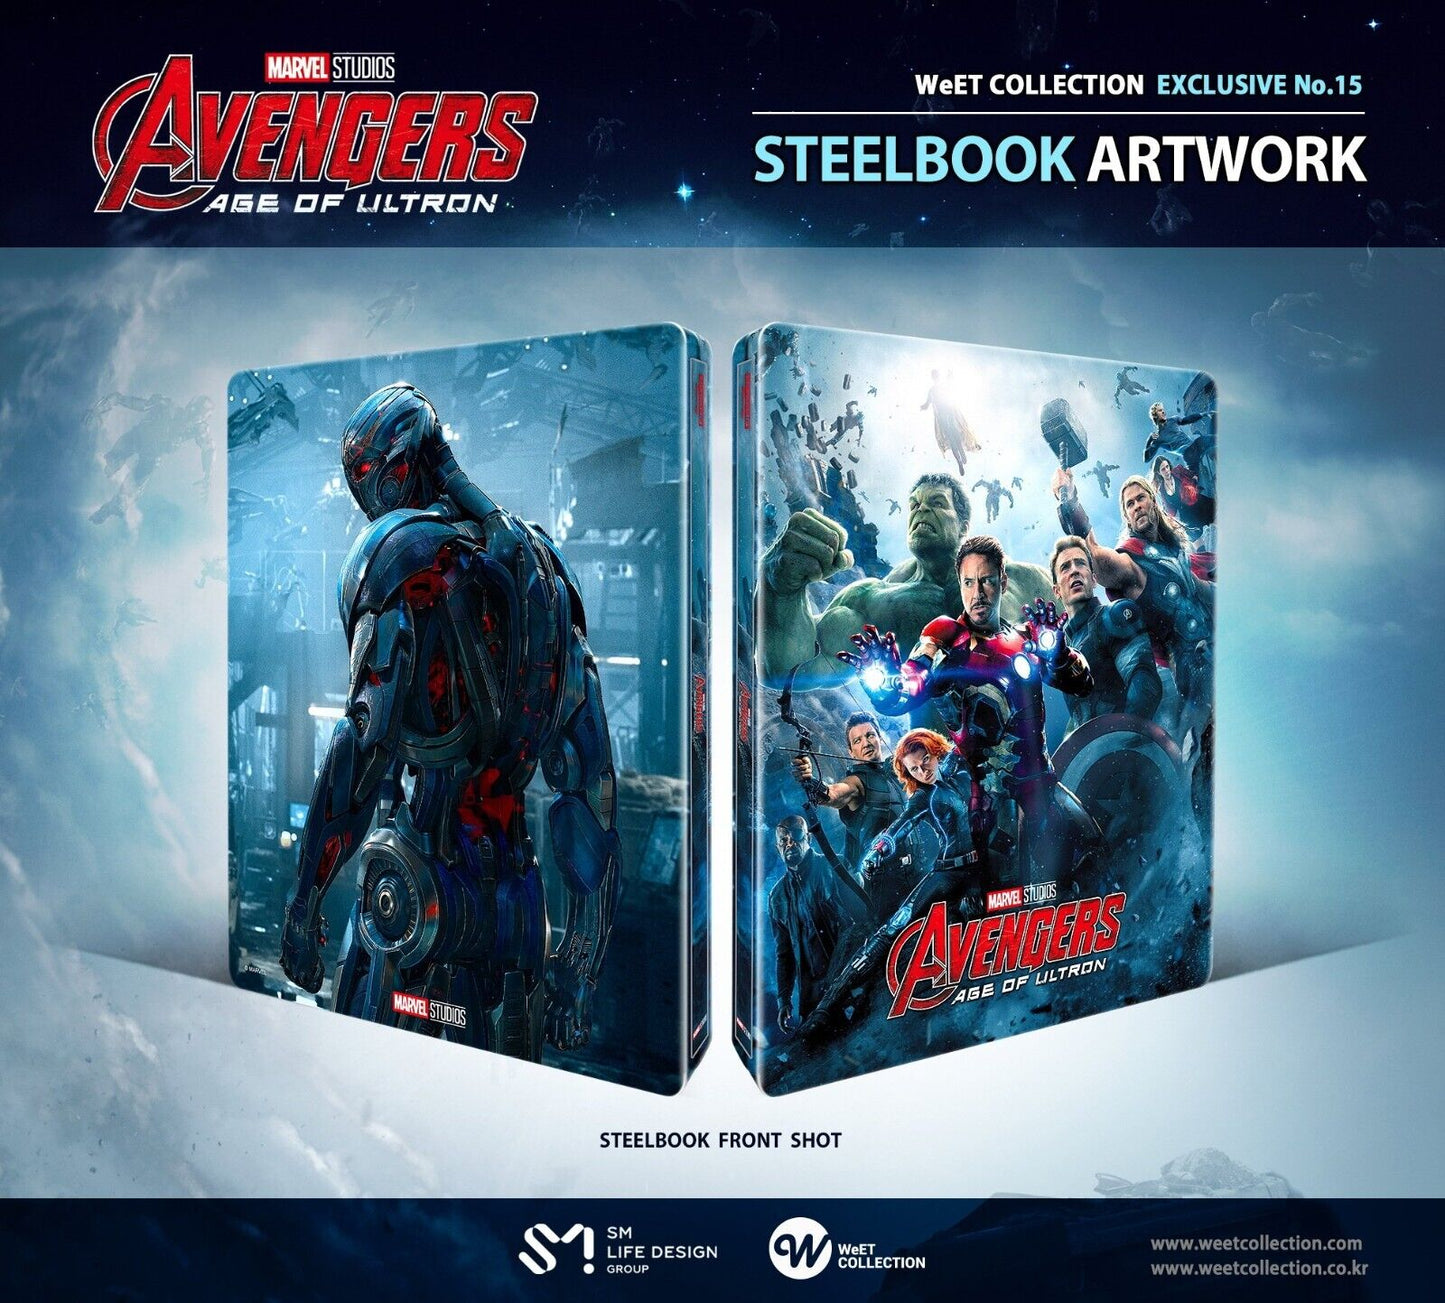 Avengers: Age of Ultron 4K+2D+3D Blu-ray SteelBook WeET Collection Exclusive #15 One Click Box Set